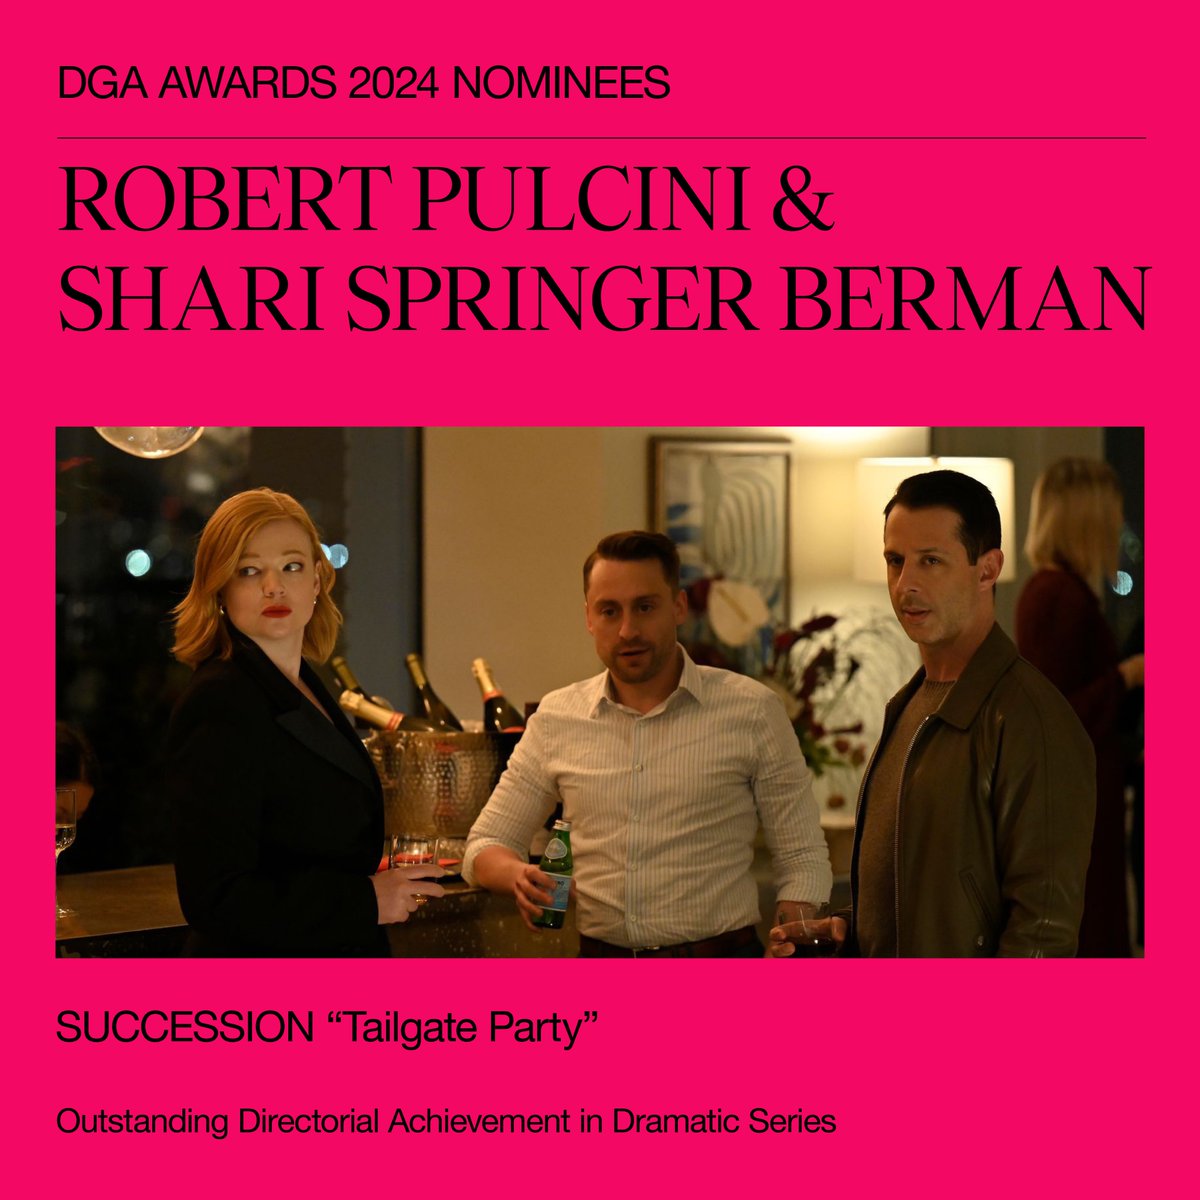 Congratulations to Robert Pulcini & Shari Springer Berman on their DGA Awards nomination for Outstanding Directorial Achievement in Dramatic Series for SUCCESSION S4 E7 “Tailgate Party”! @RowHouseFilms @directorsguild @succession @StreamOnMax @HBO